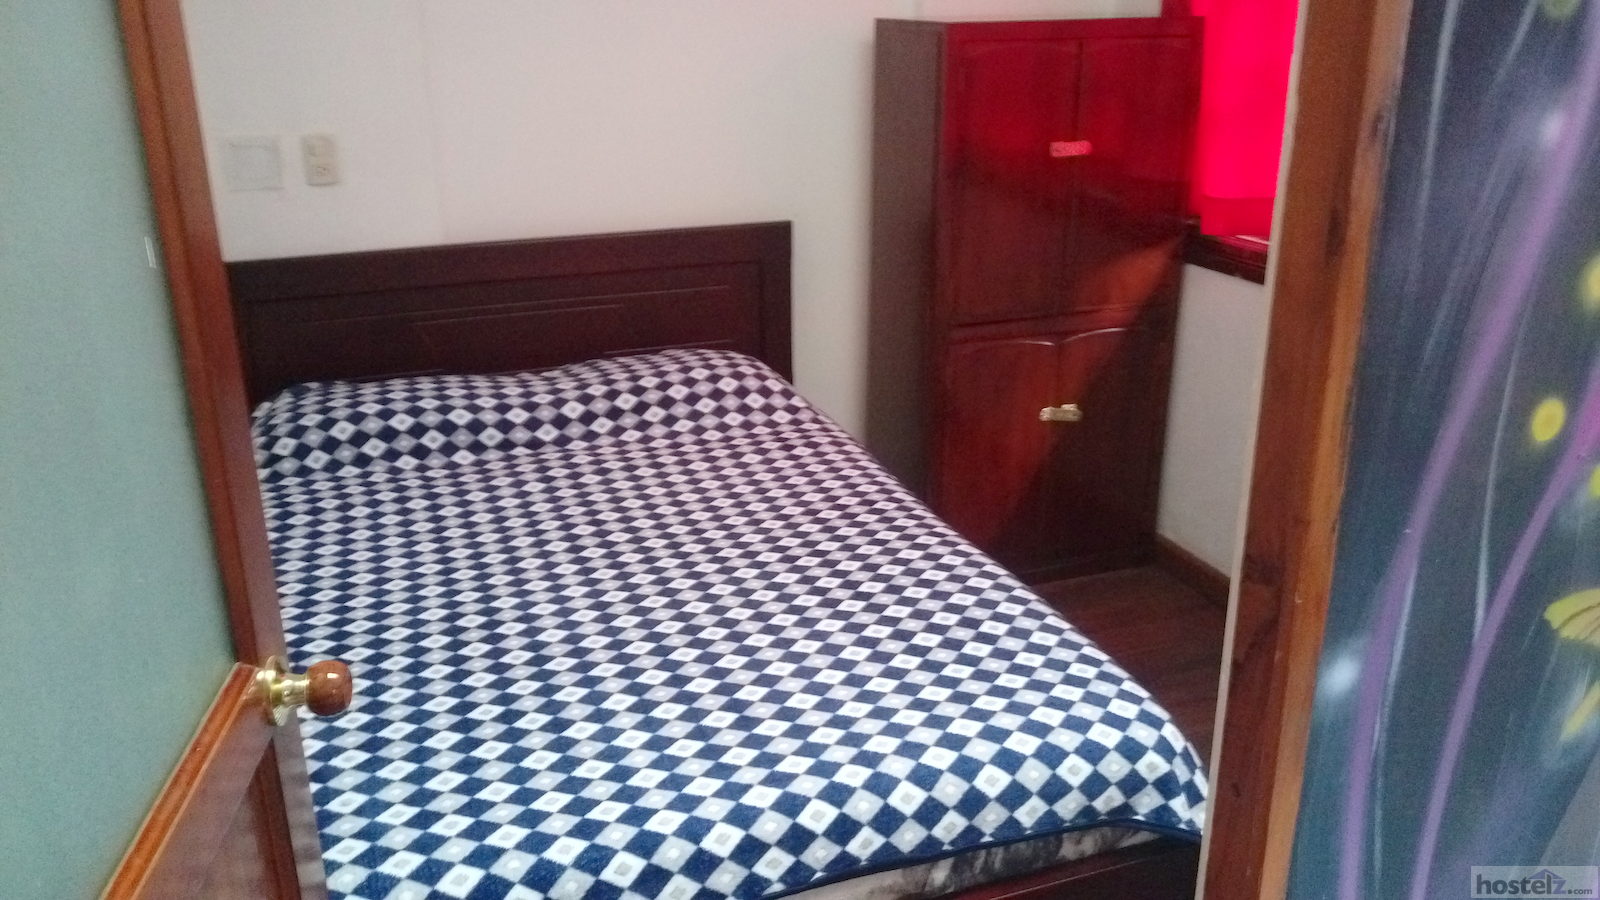 A double private room in Anicha Hostel.